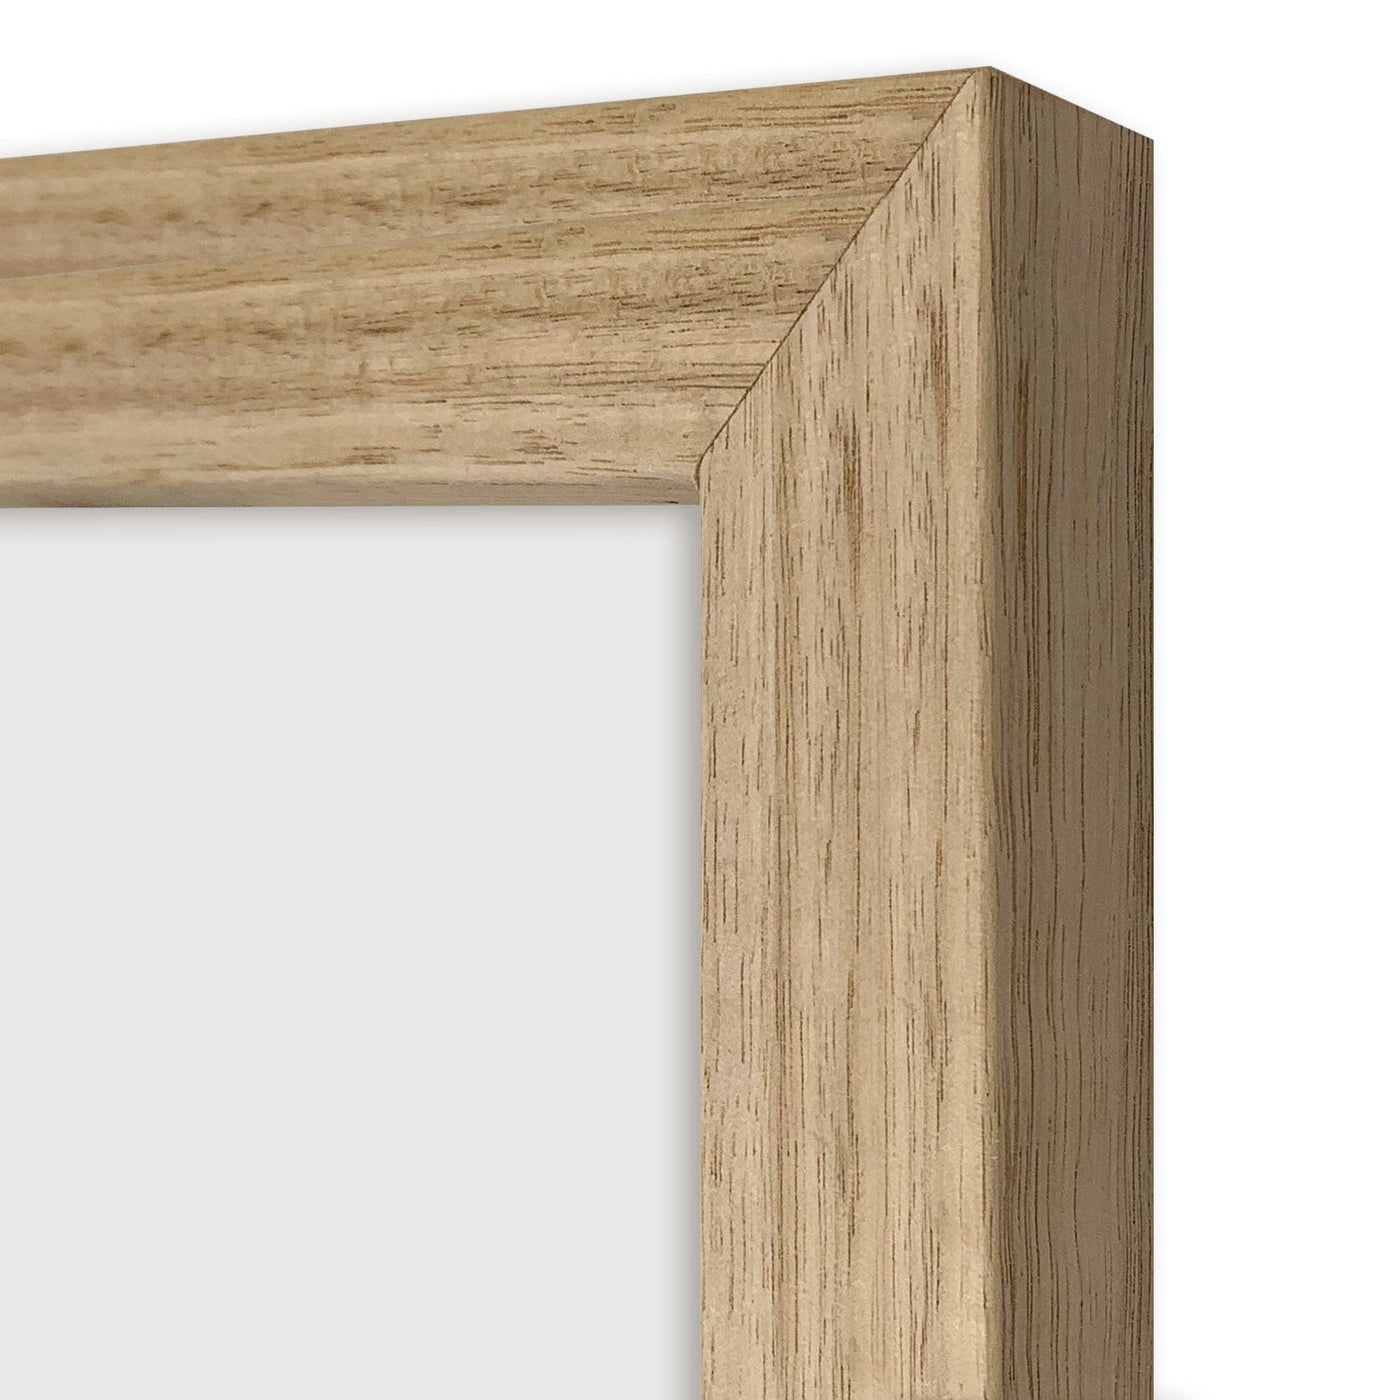 Classic Victorian Ash 50x70cm Picture Frame from our Australian Made Picture Frames collection by Profile Products Australia